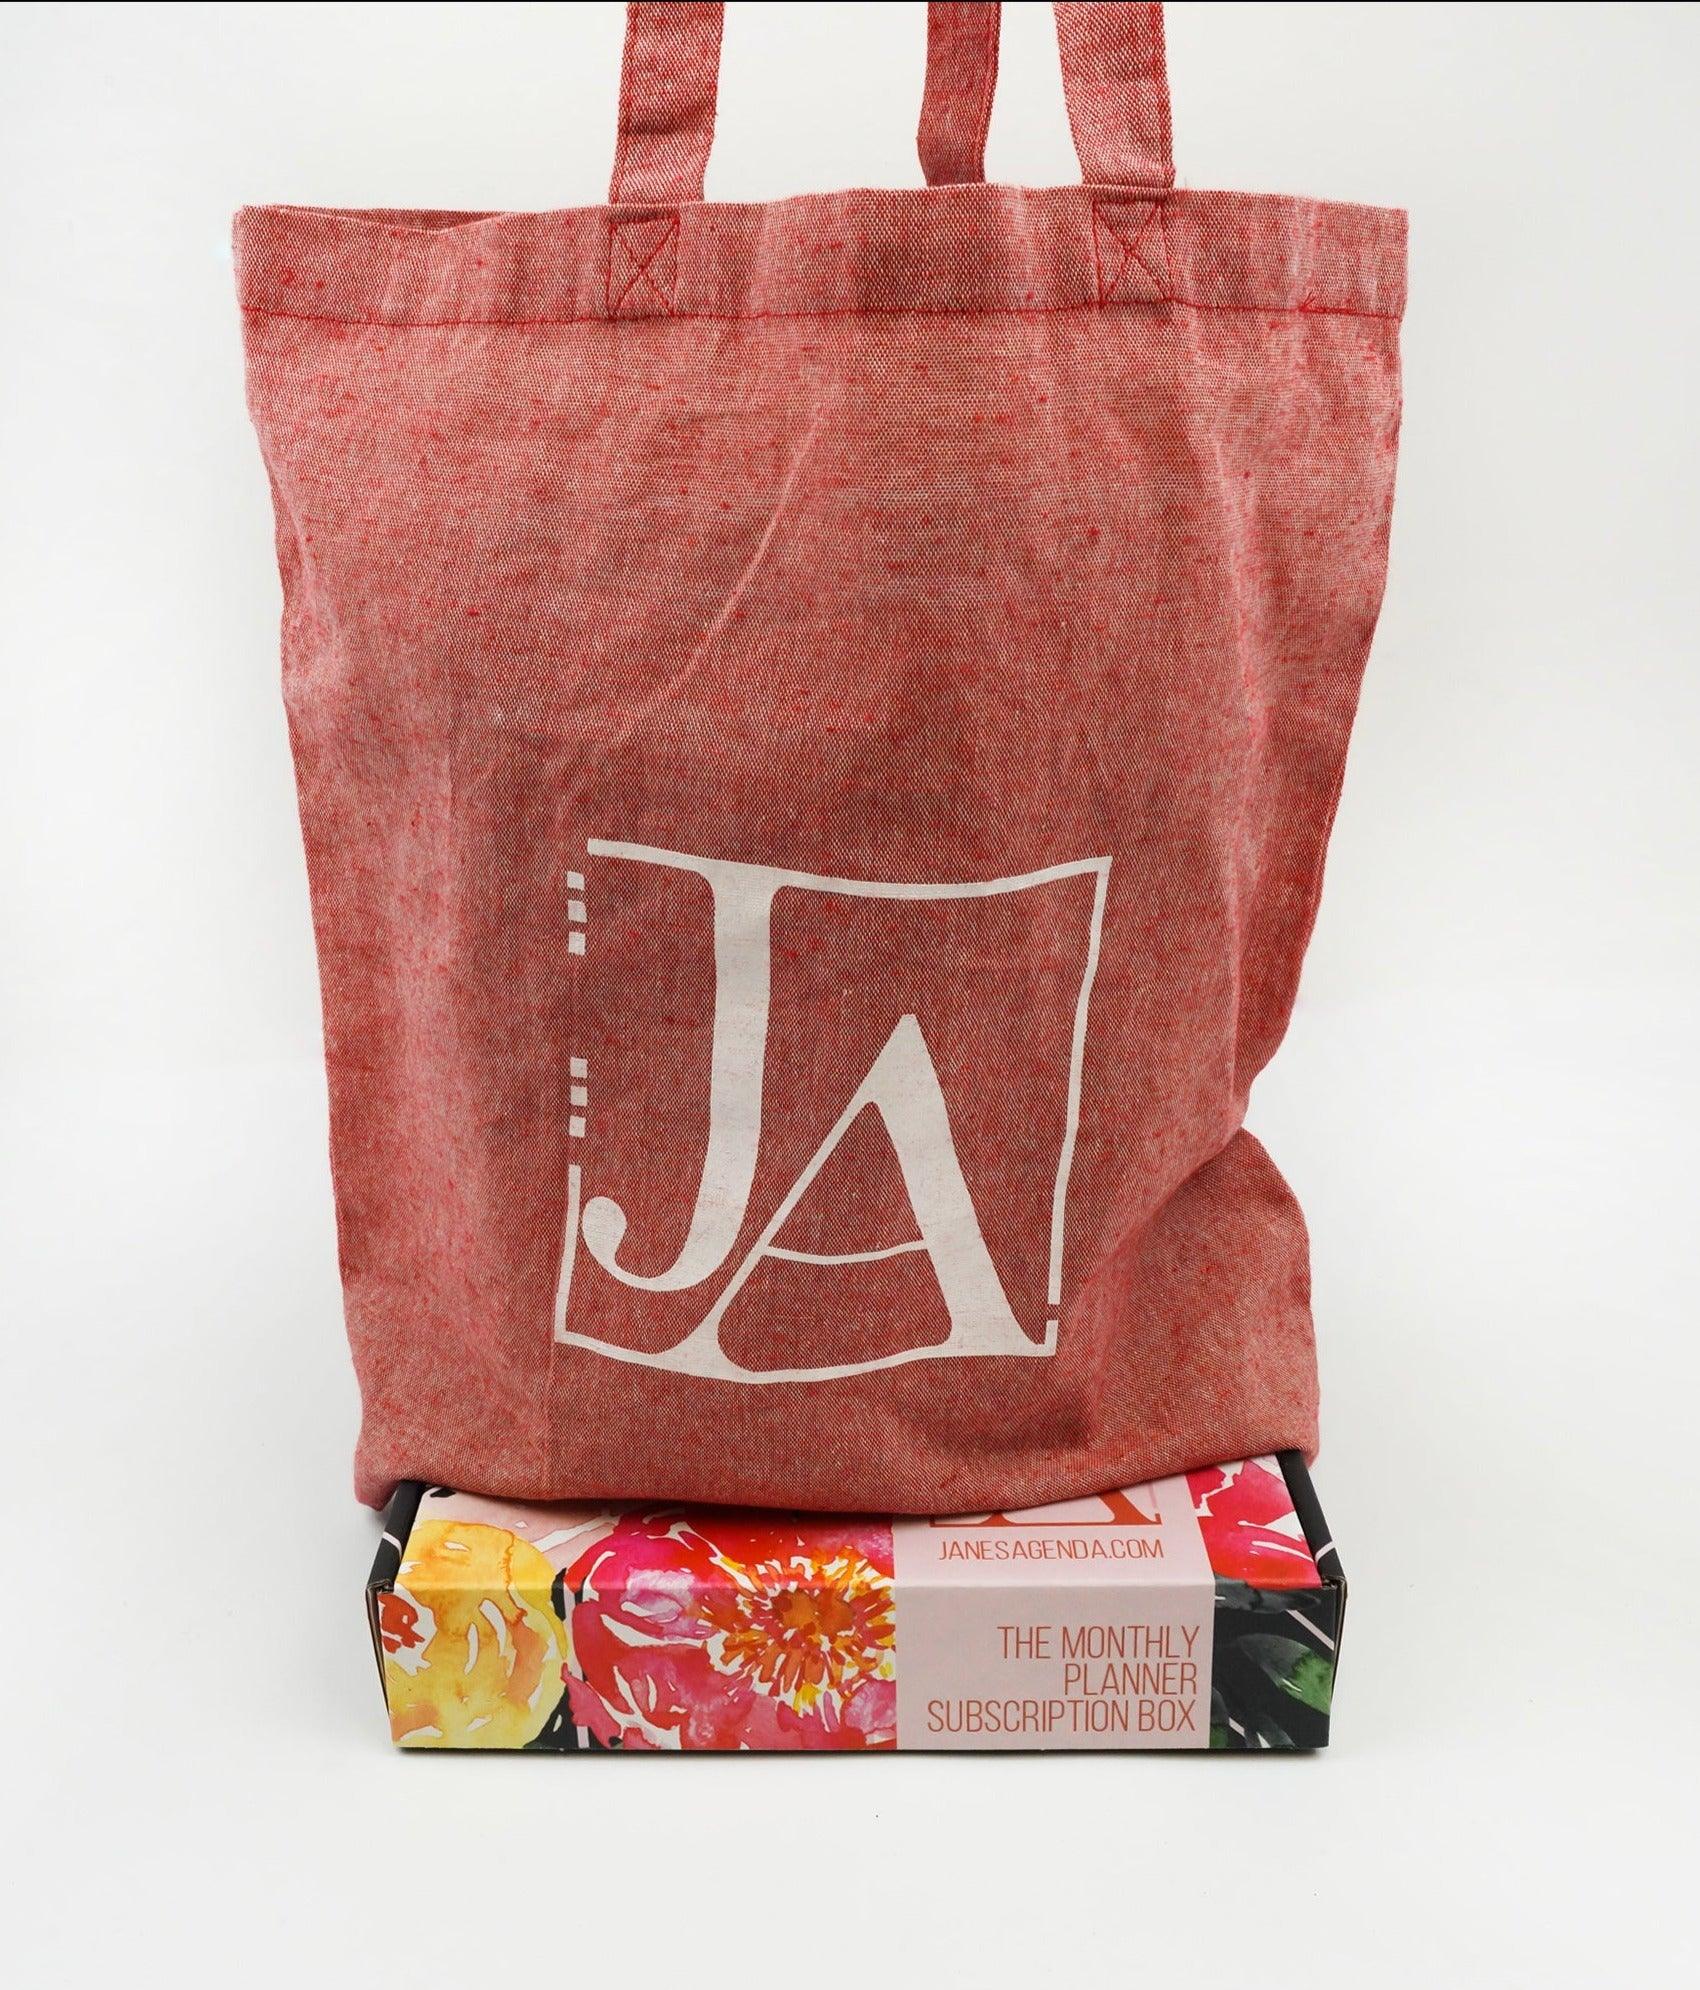 Planner and tote bag by Jane's Agenda, a planner lifestyle brand.